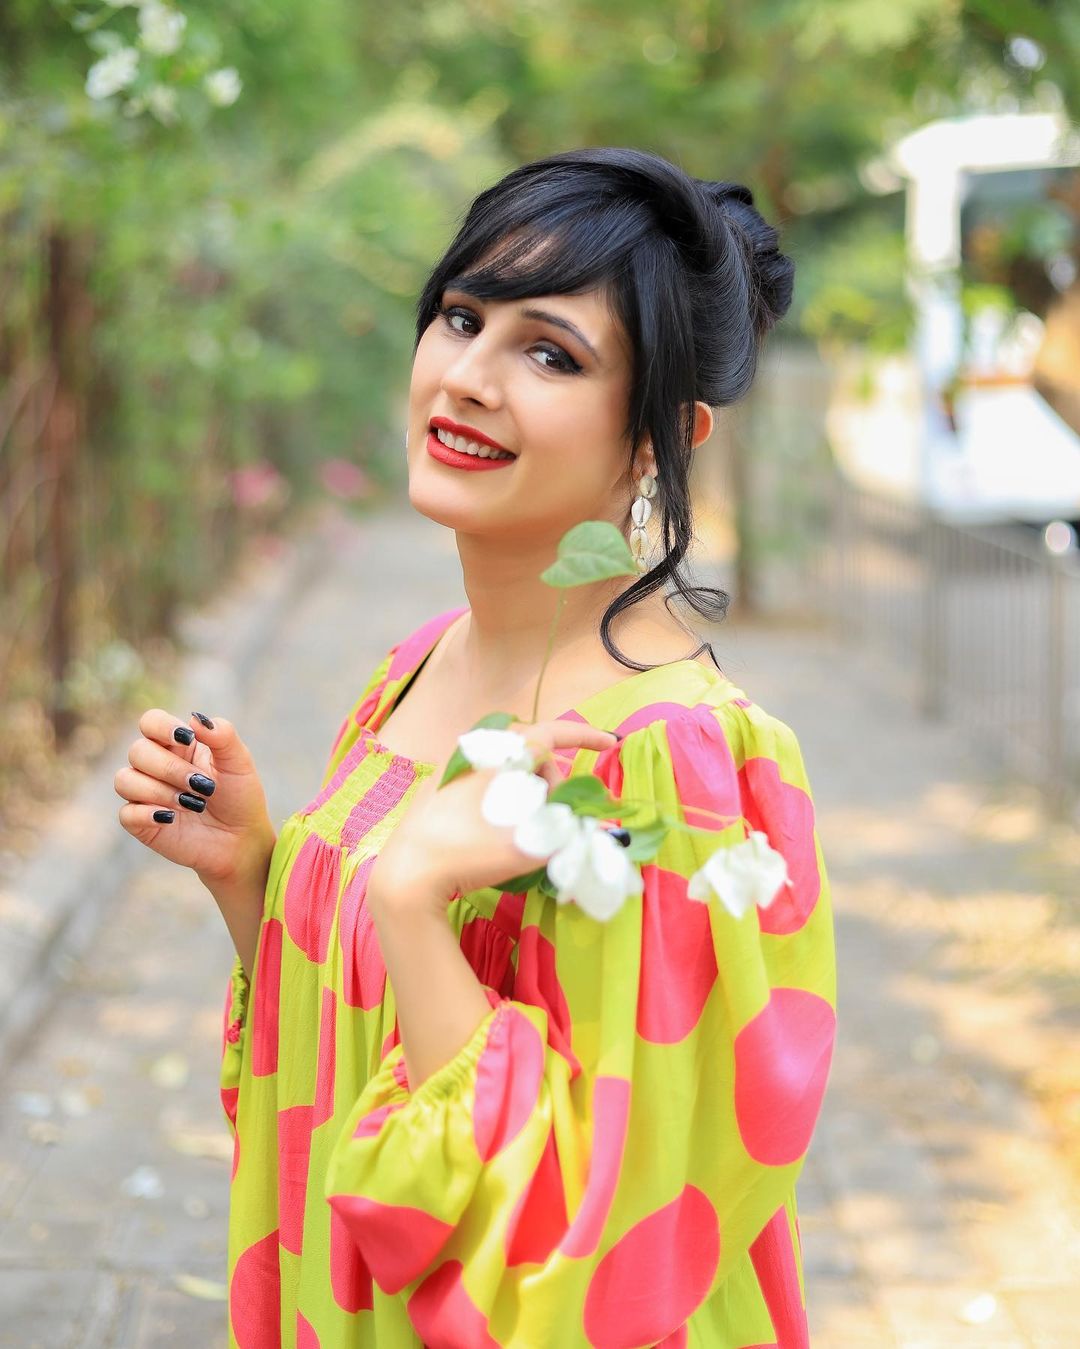 Actress Saanvie Tallwar Praises Co-Actor Raqesh Bapat And Says, “He Is An Amazing Person”!